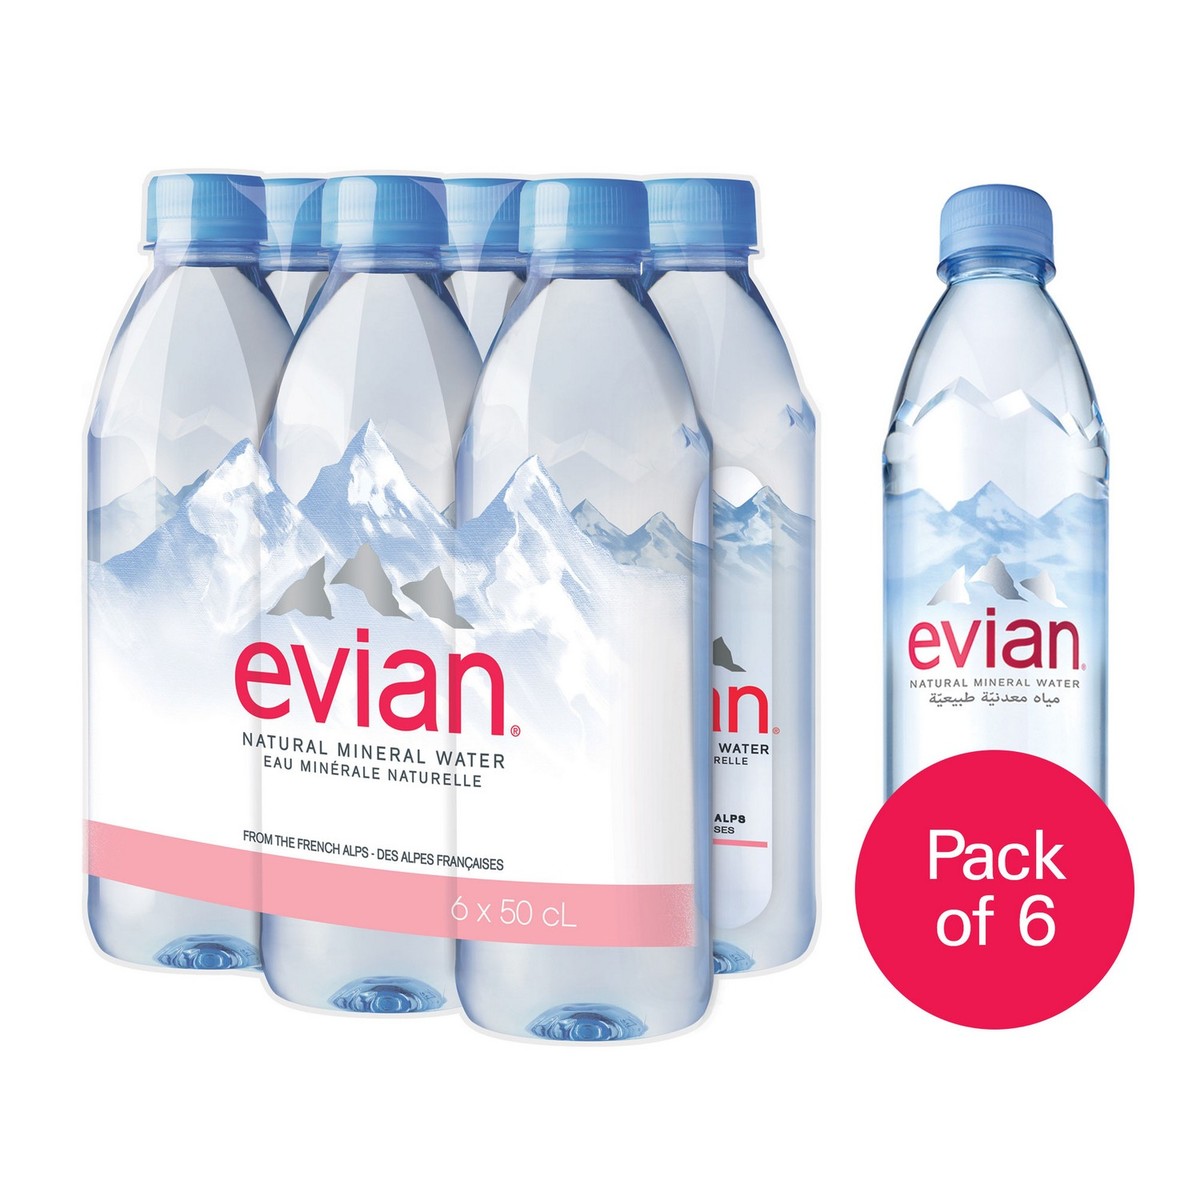 Would you like mineral water. Эвиан. Вода Эвиан. Вода Эвиан 0.5. 'Nnbrtnrf Evian.